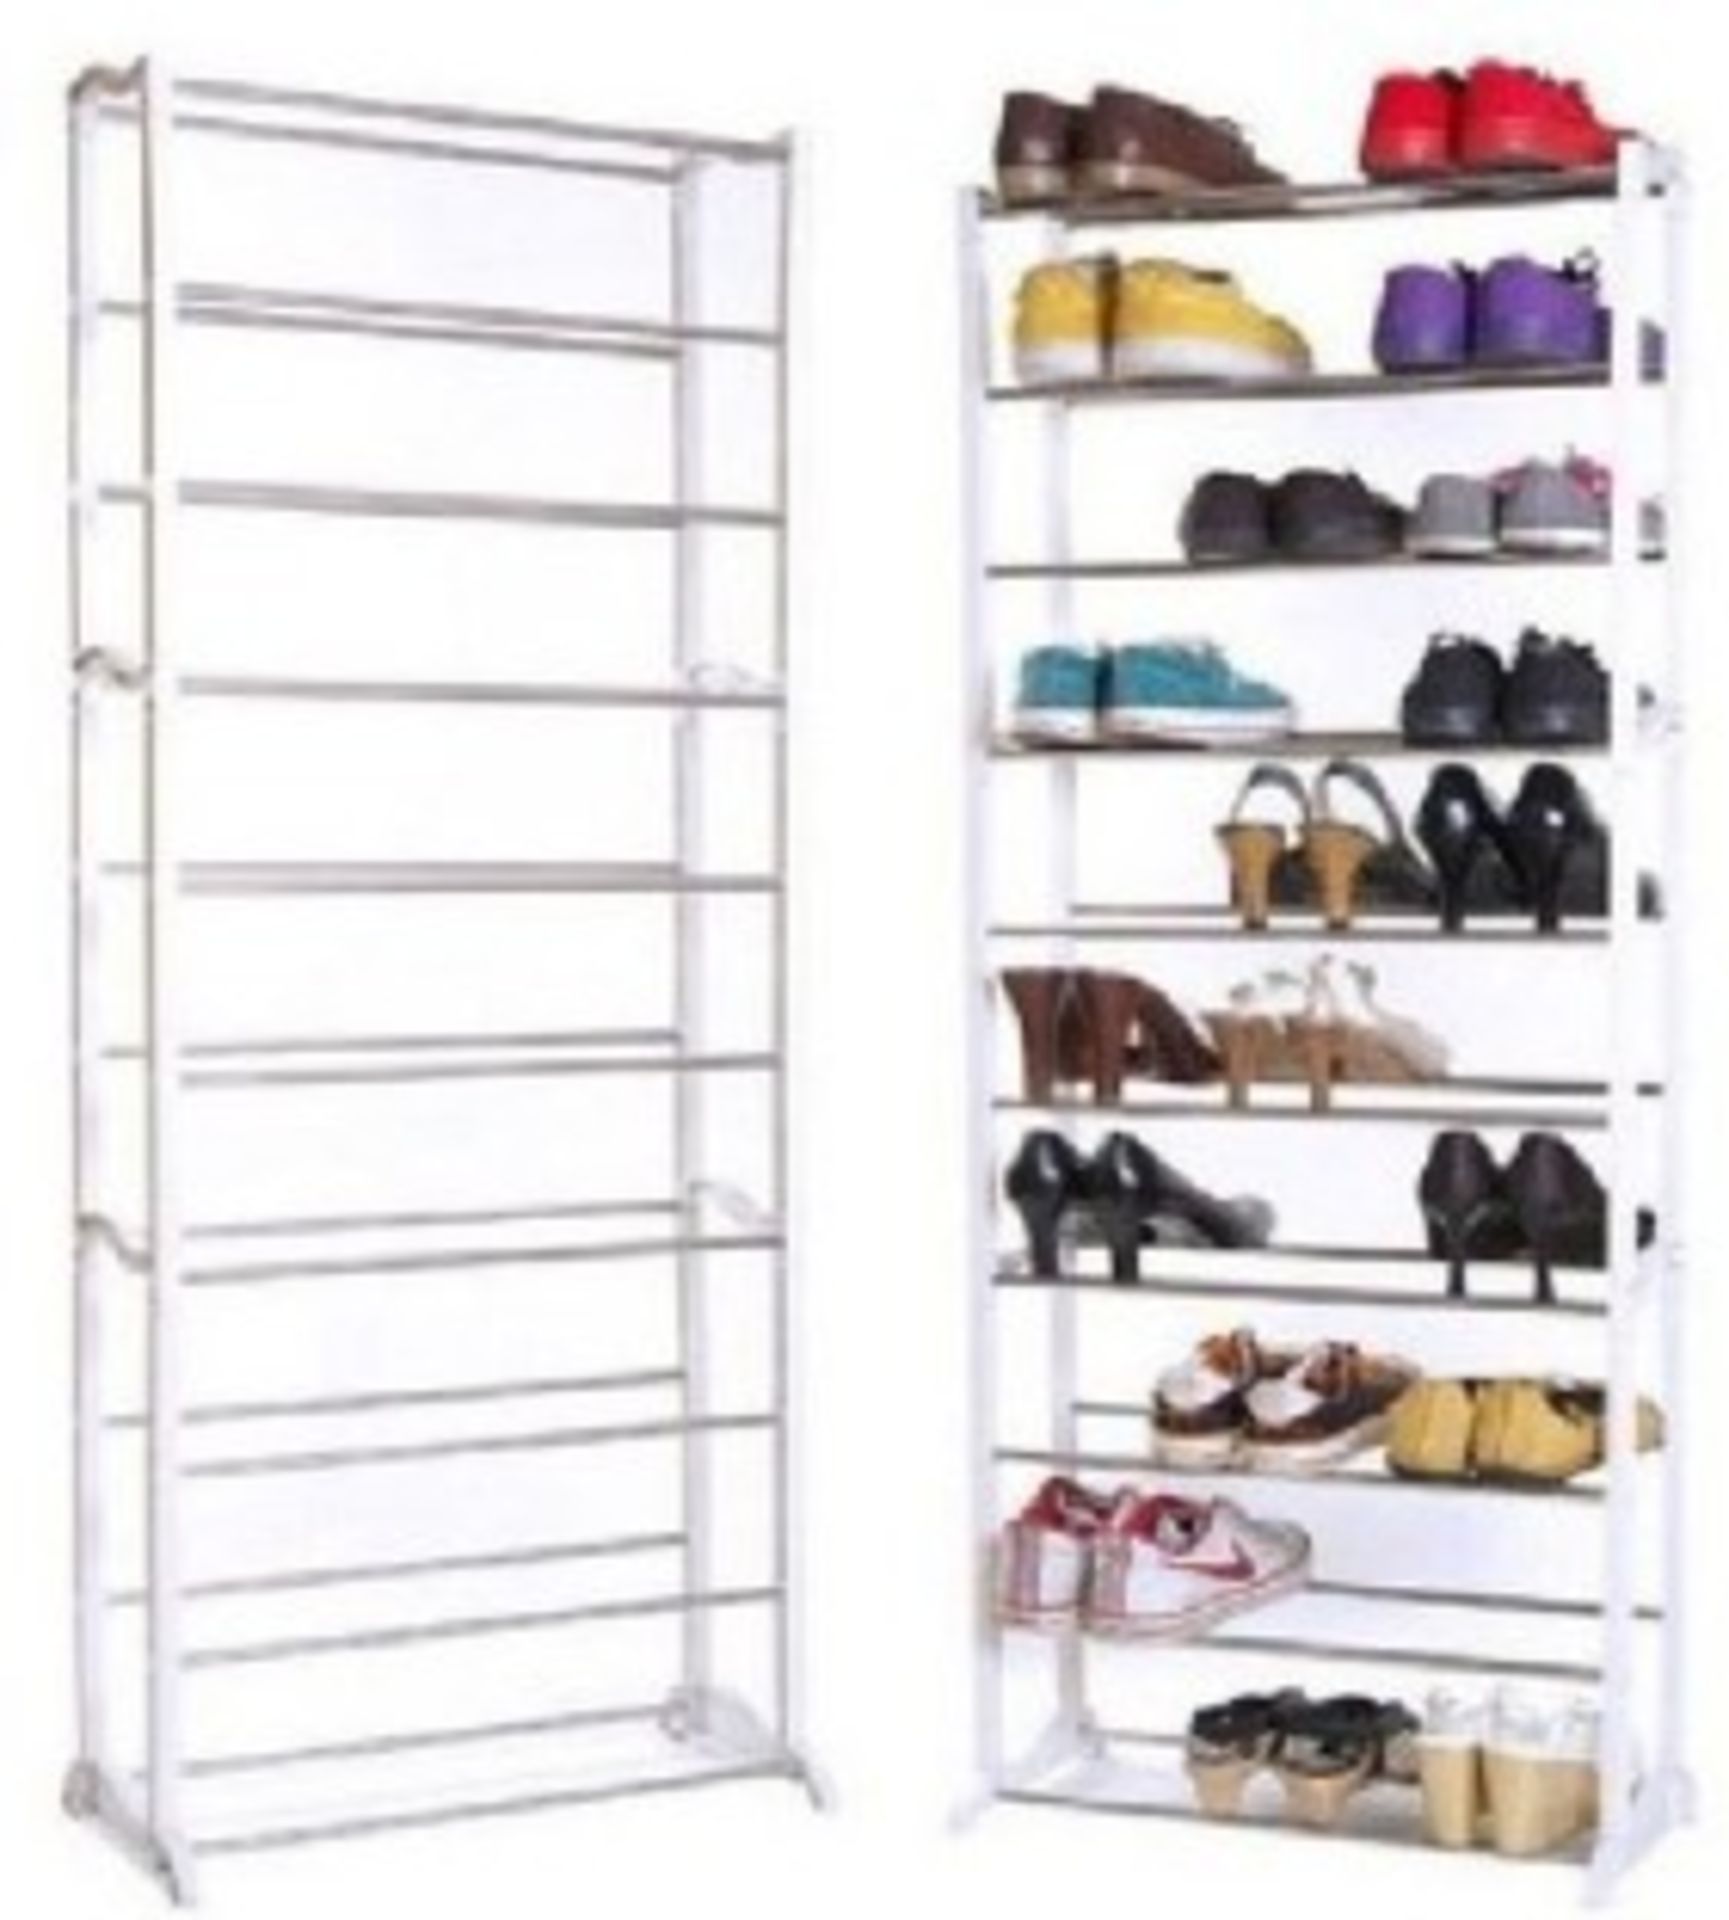 V Brand New Ten Tier Shoe Rack - Holds Up to Fifty Pairs - Easy To Assemble - Space Saving